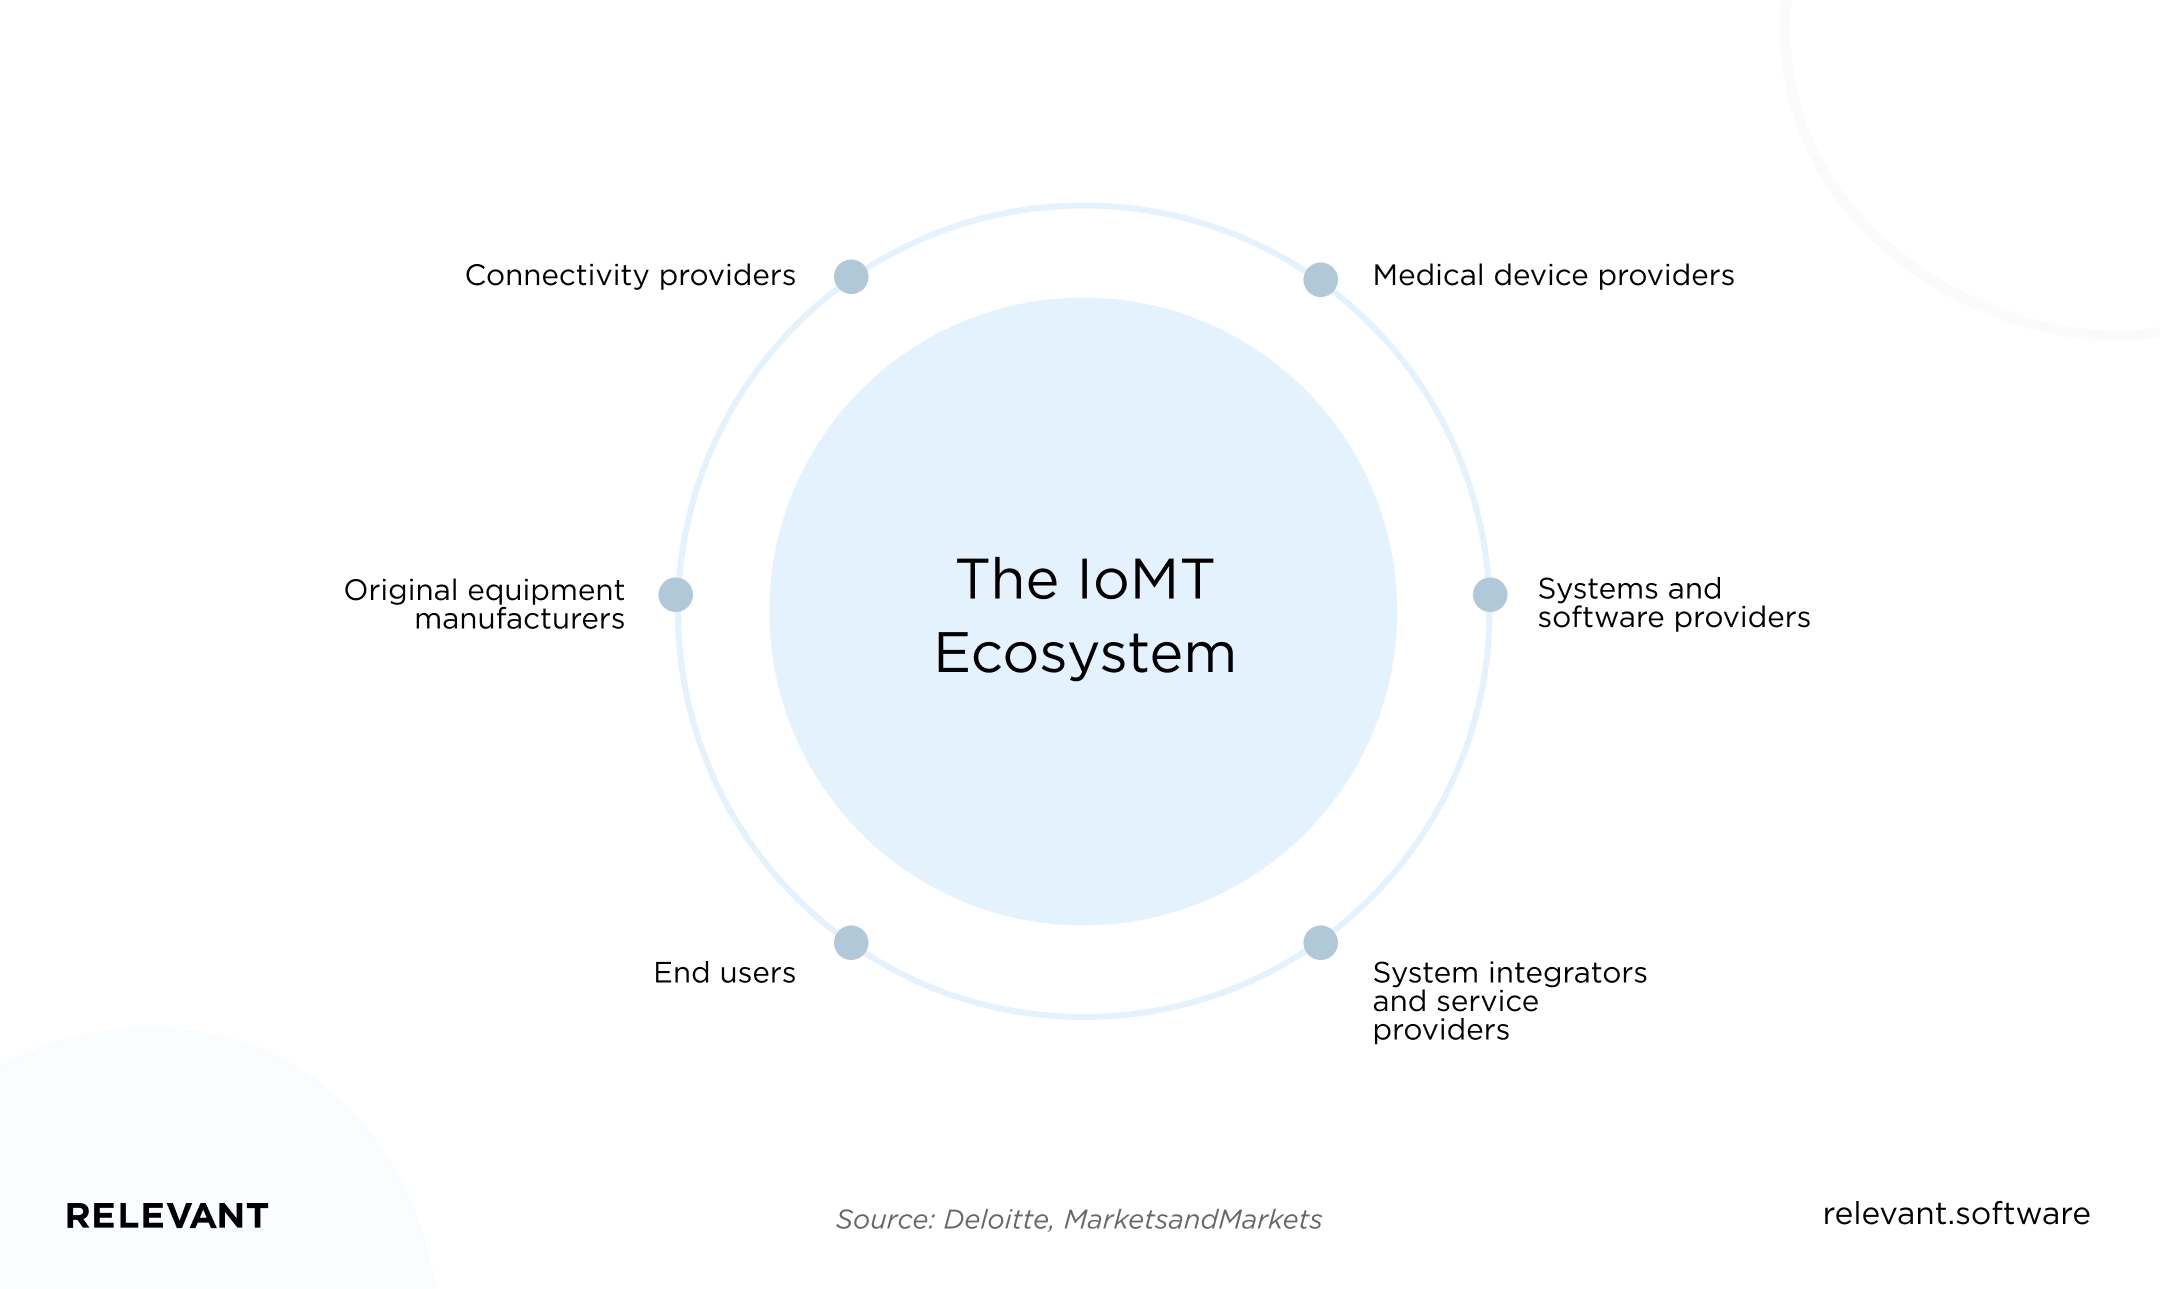 The IoMT Ecosystem